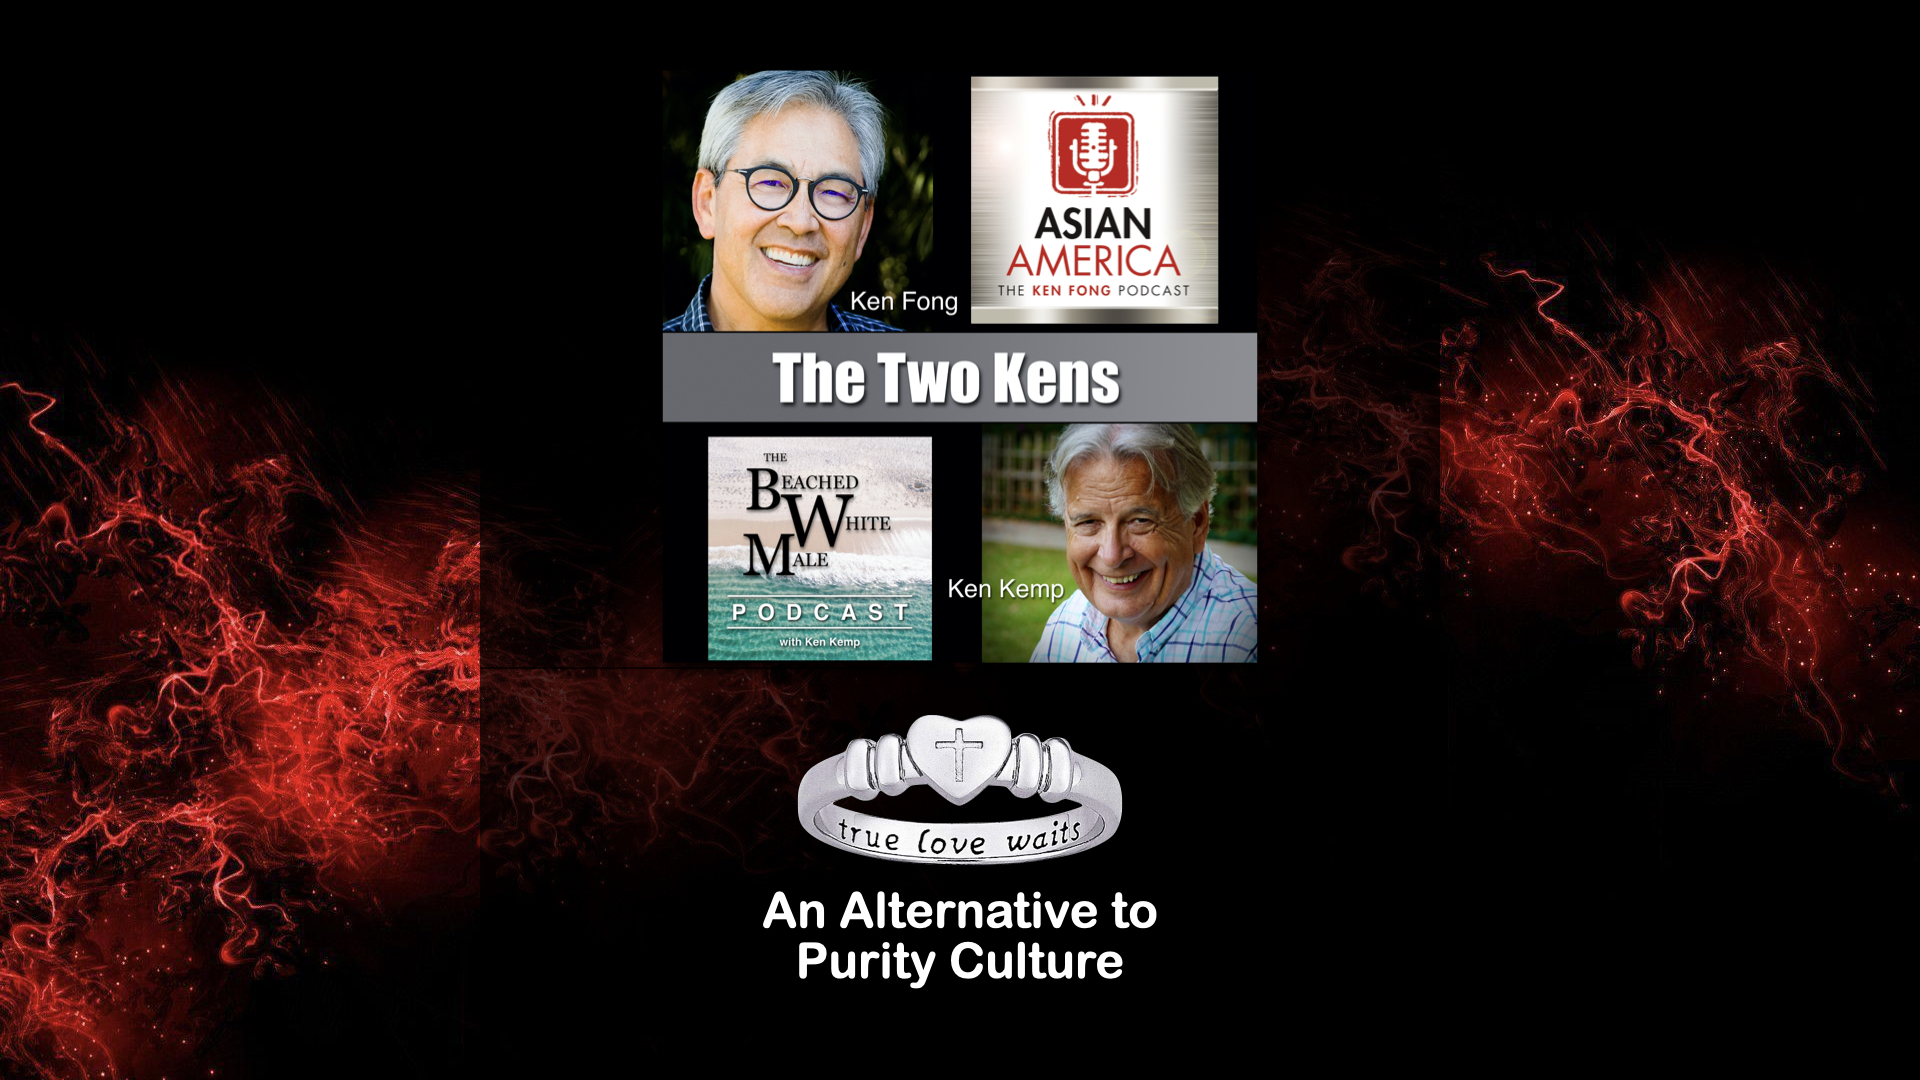 Ep 298: The Two Ken’s: A Practical Alternative to Purity Culture